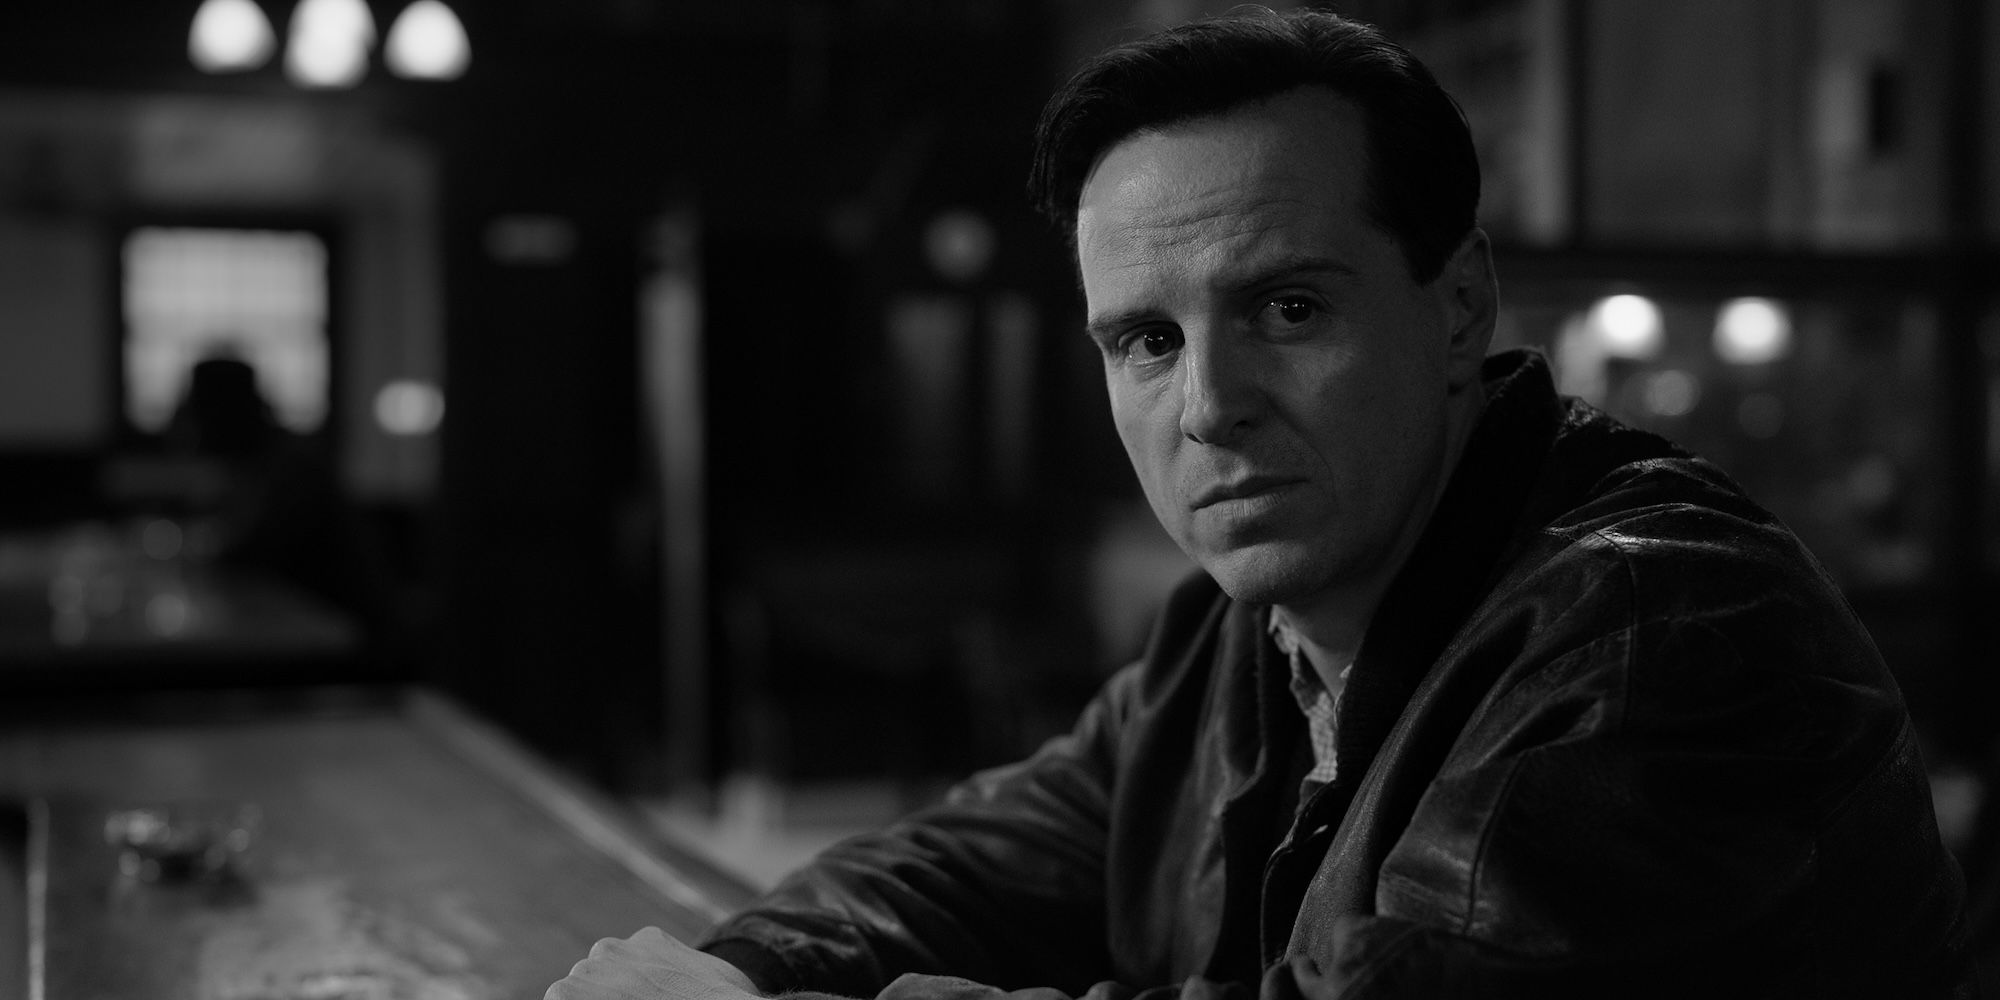 Andrew Scott as Tom Ripley, sitting in a bar in the Ripley series